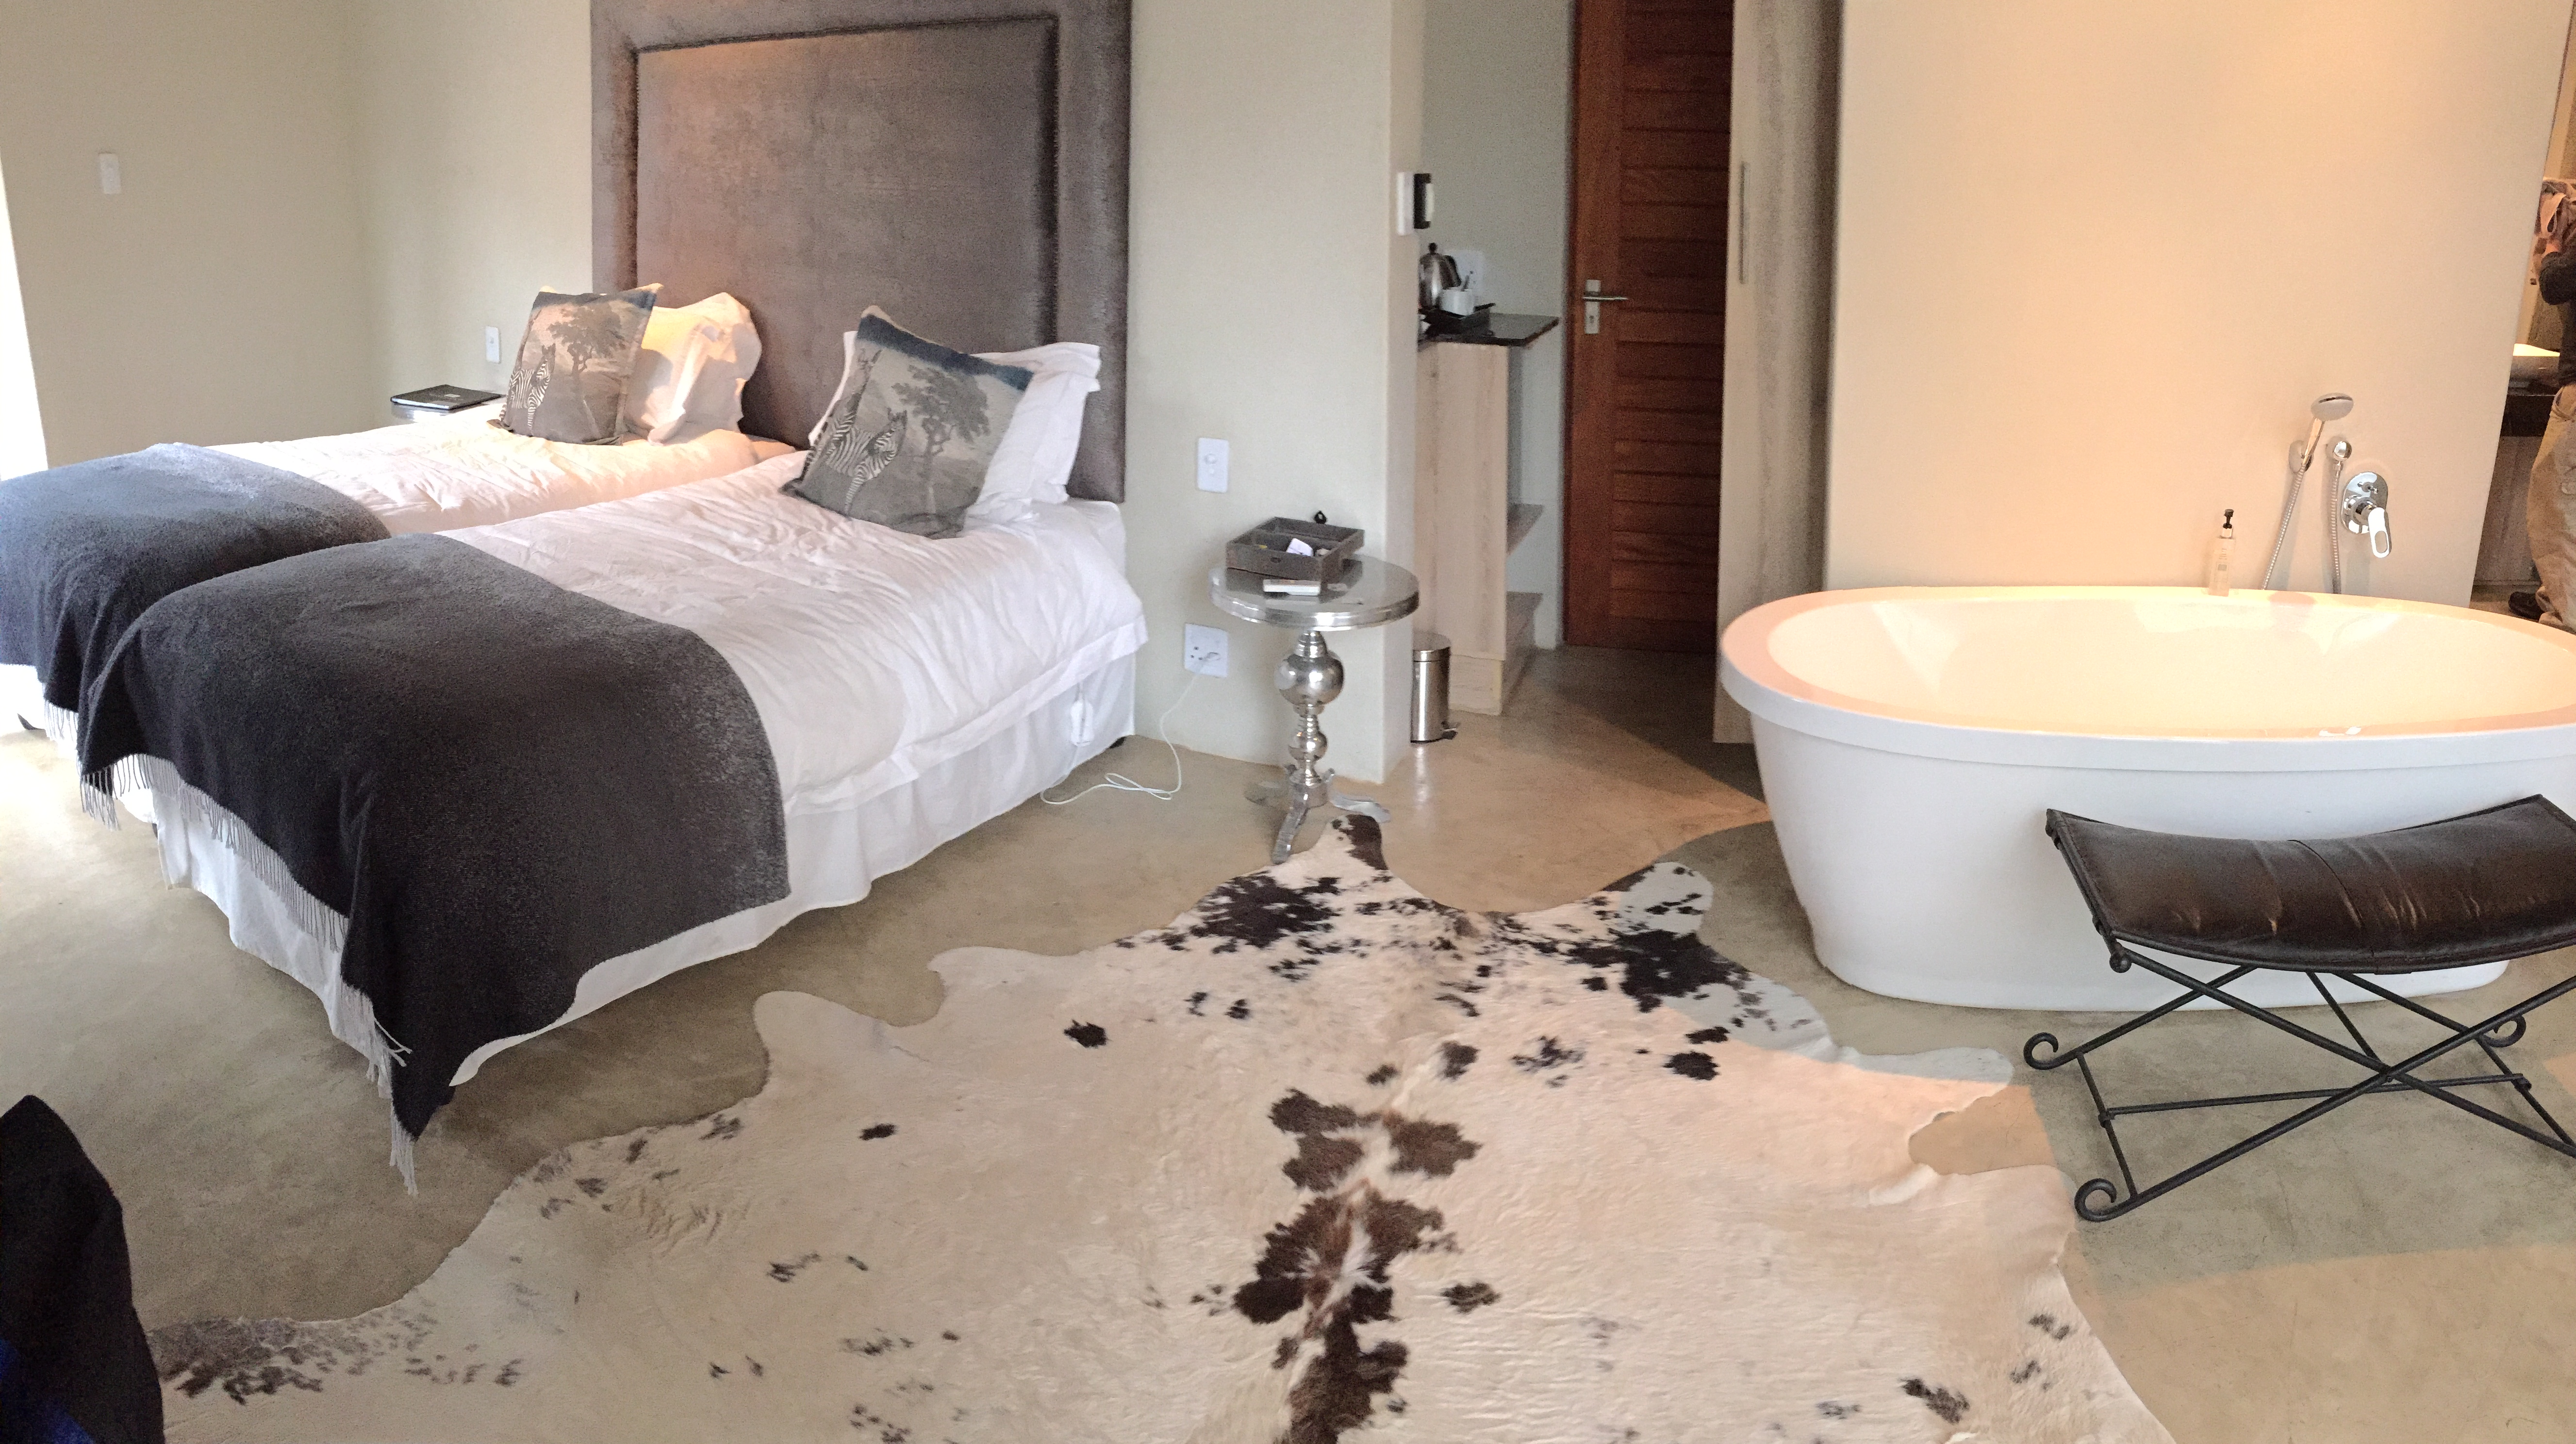 Enjoy a luxury stay in the middle of the bush at Moditlo Lodge in Hoedspruit. South Africa